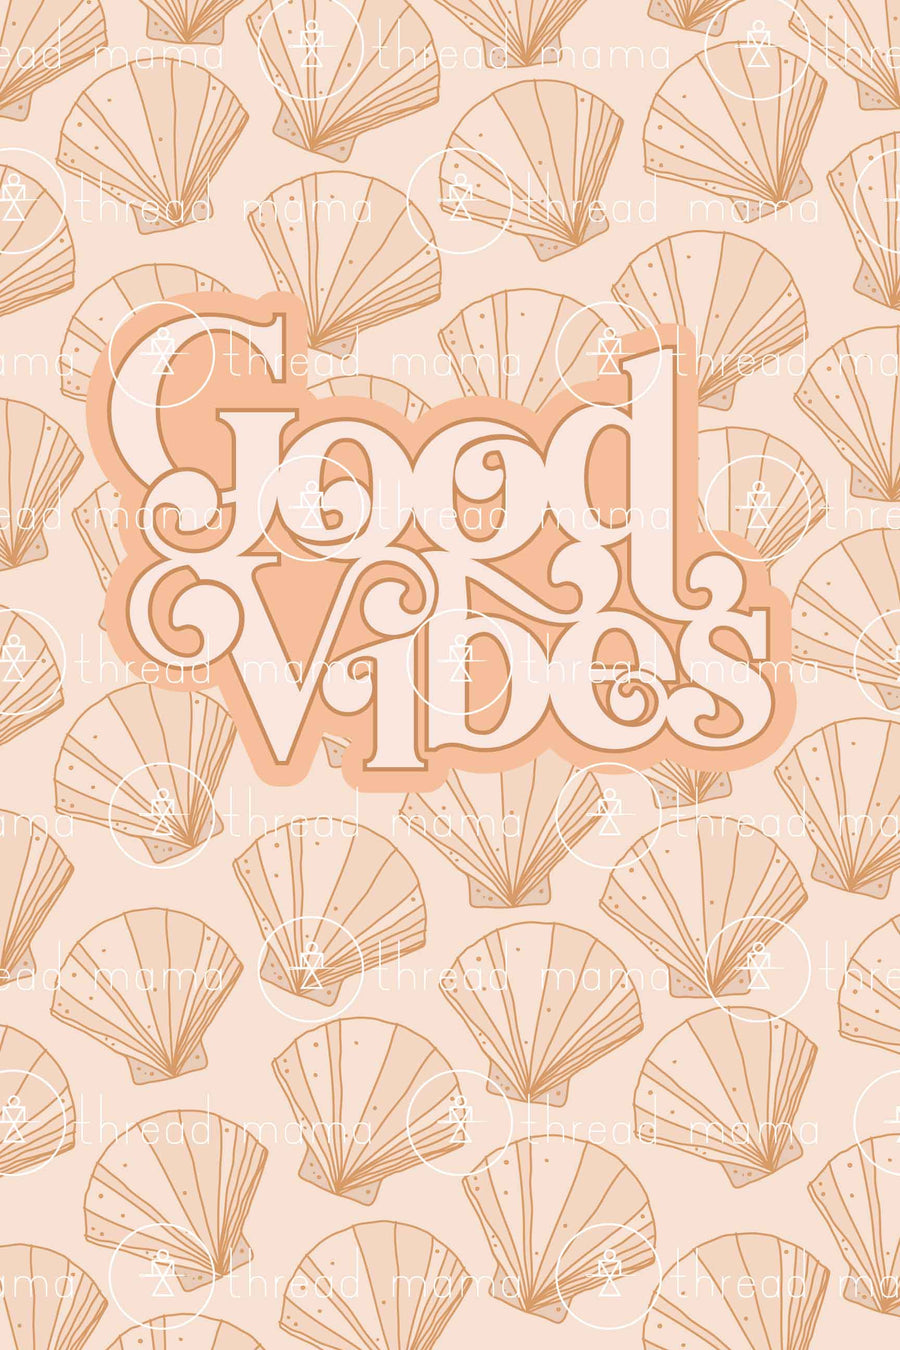 Good Vibes / Let's Shellabrate (Printable Poster)